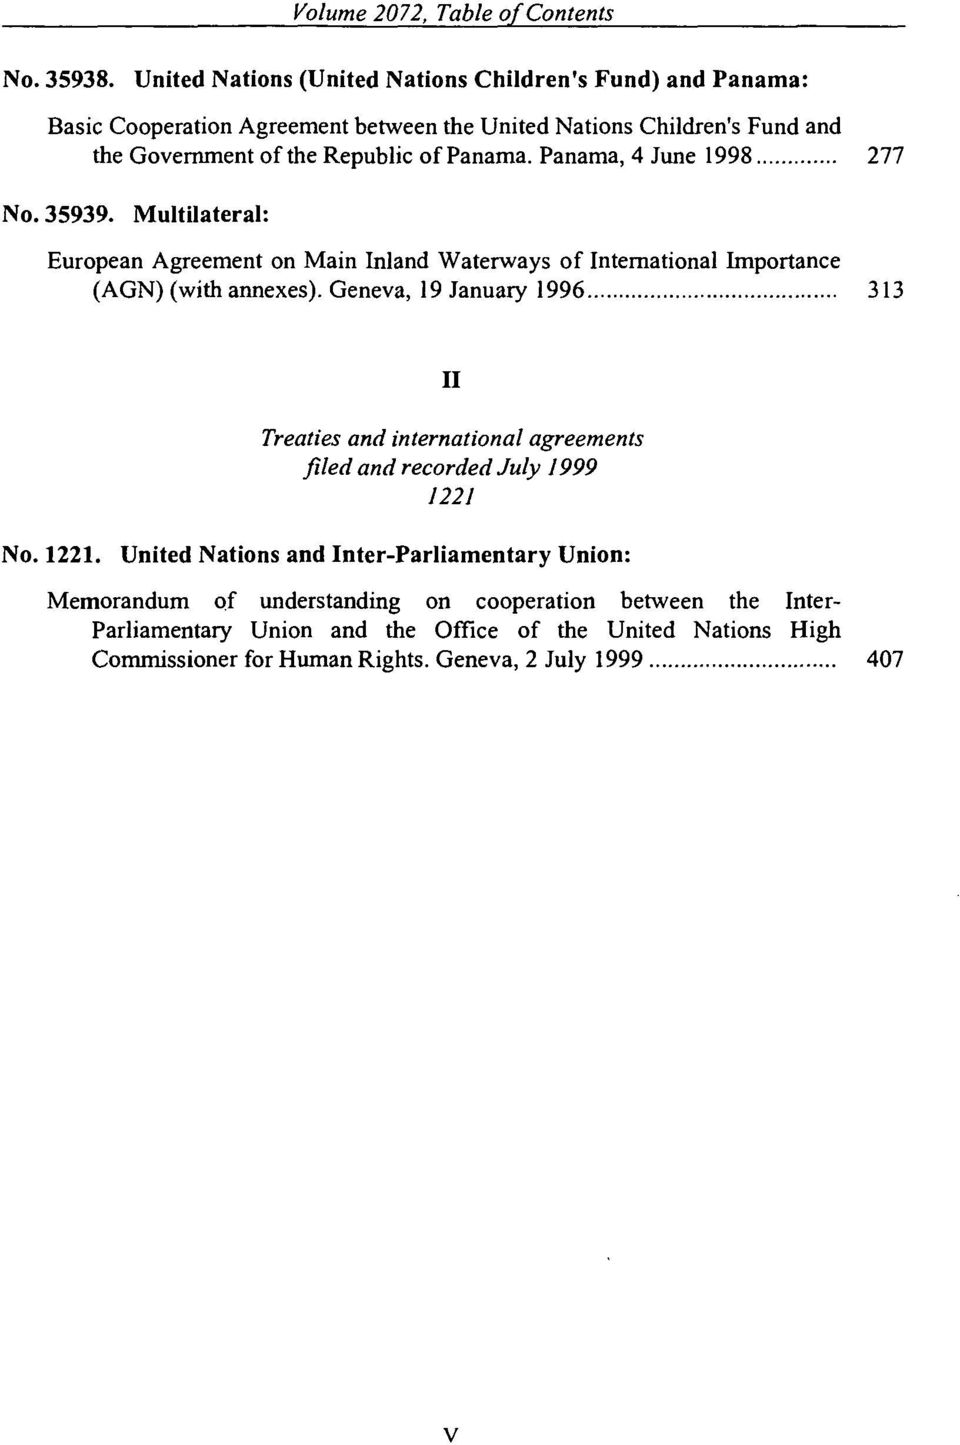 Panama, 4 June 1998... 277 No. 35939. Multilateral: European Agreement on Main Inland Waterways of International Importance (AGN) (with annexes). Geneva, 19 January 1996.